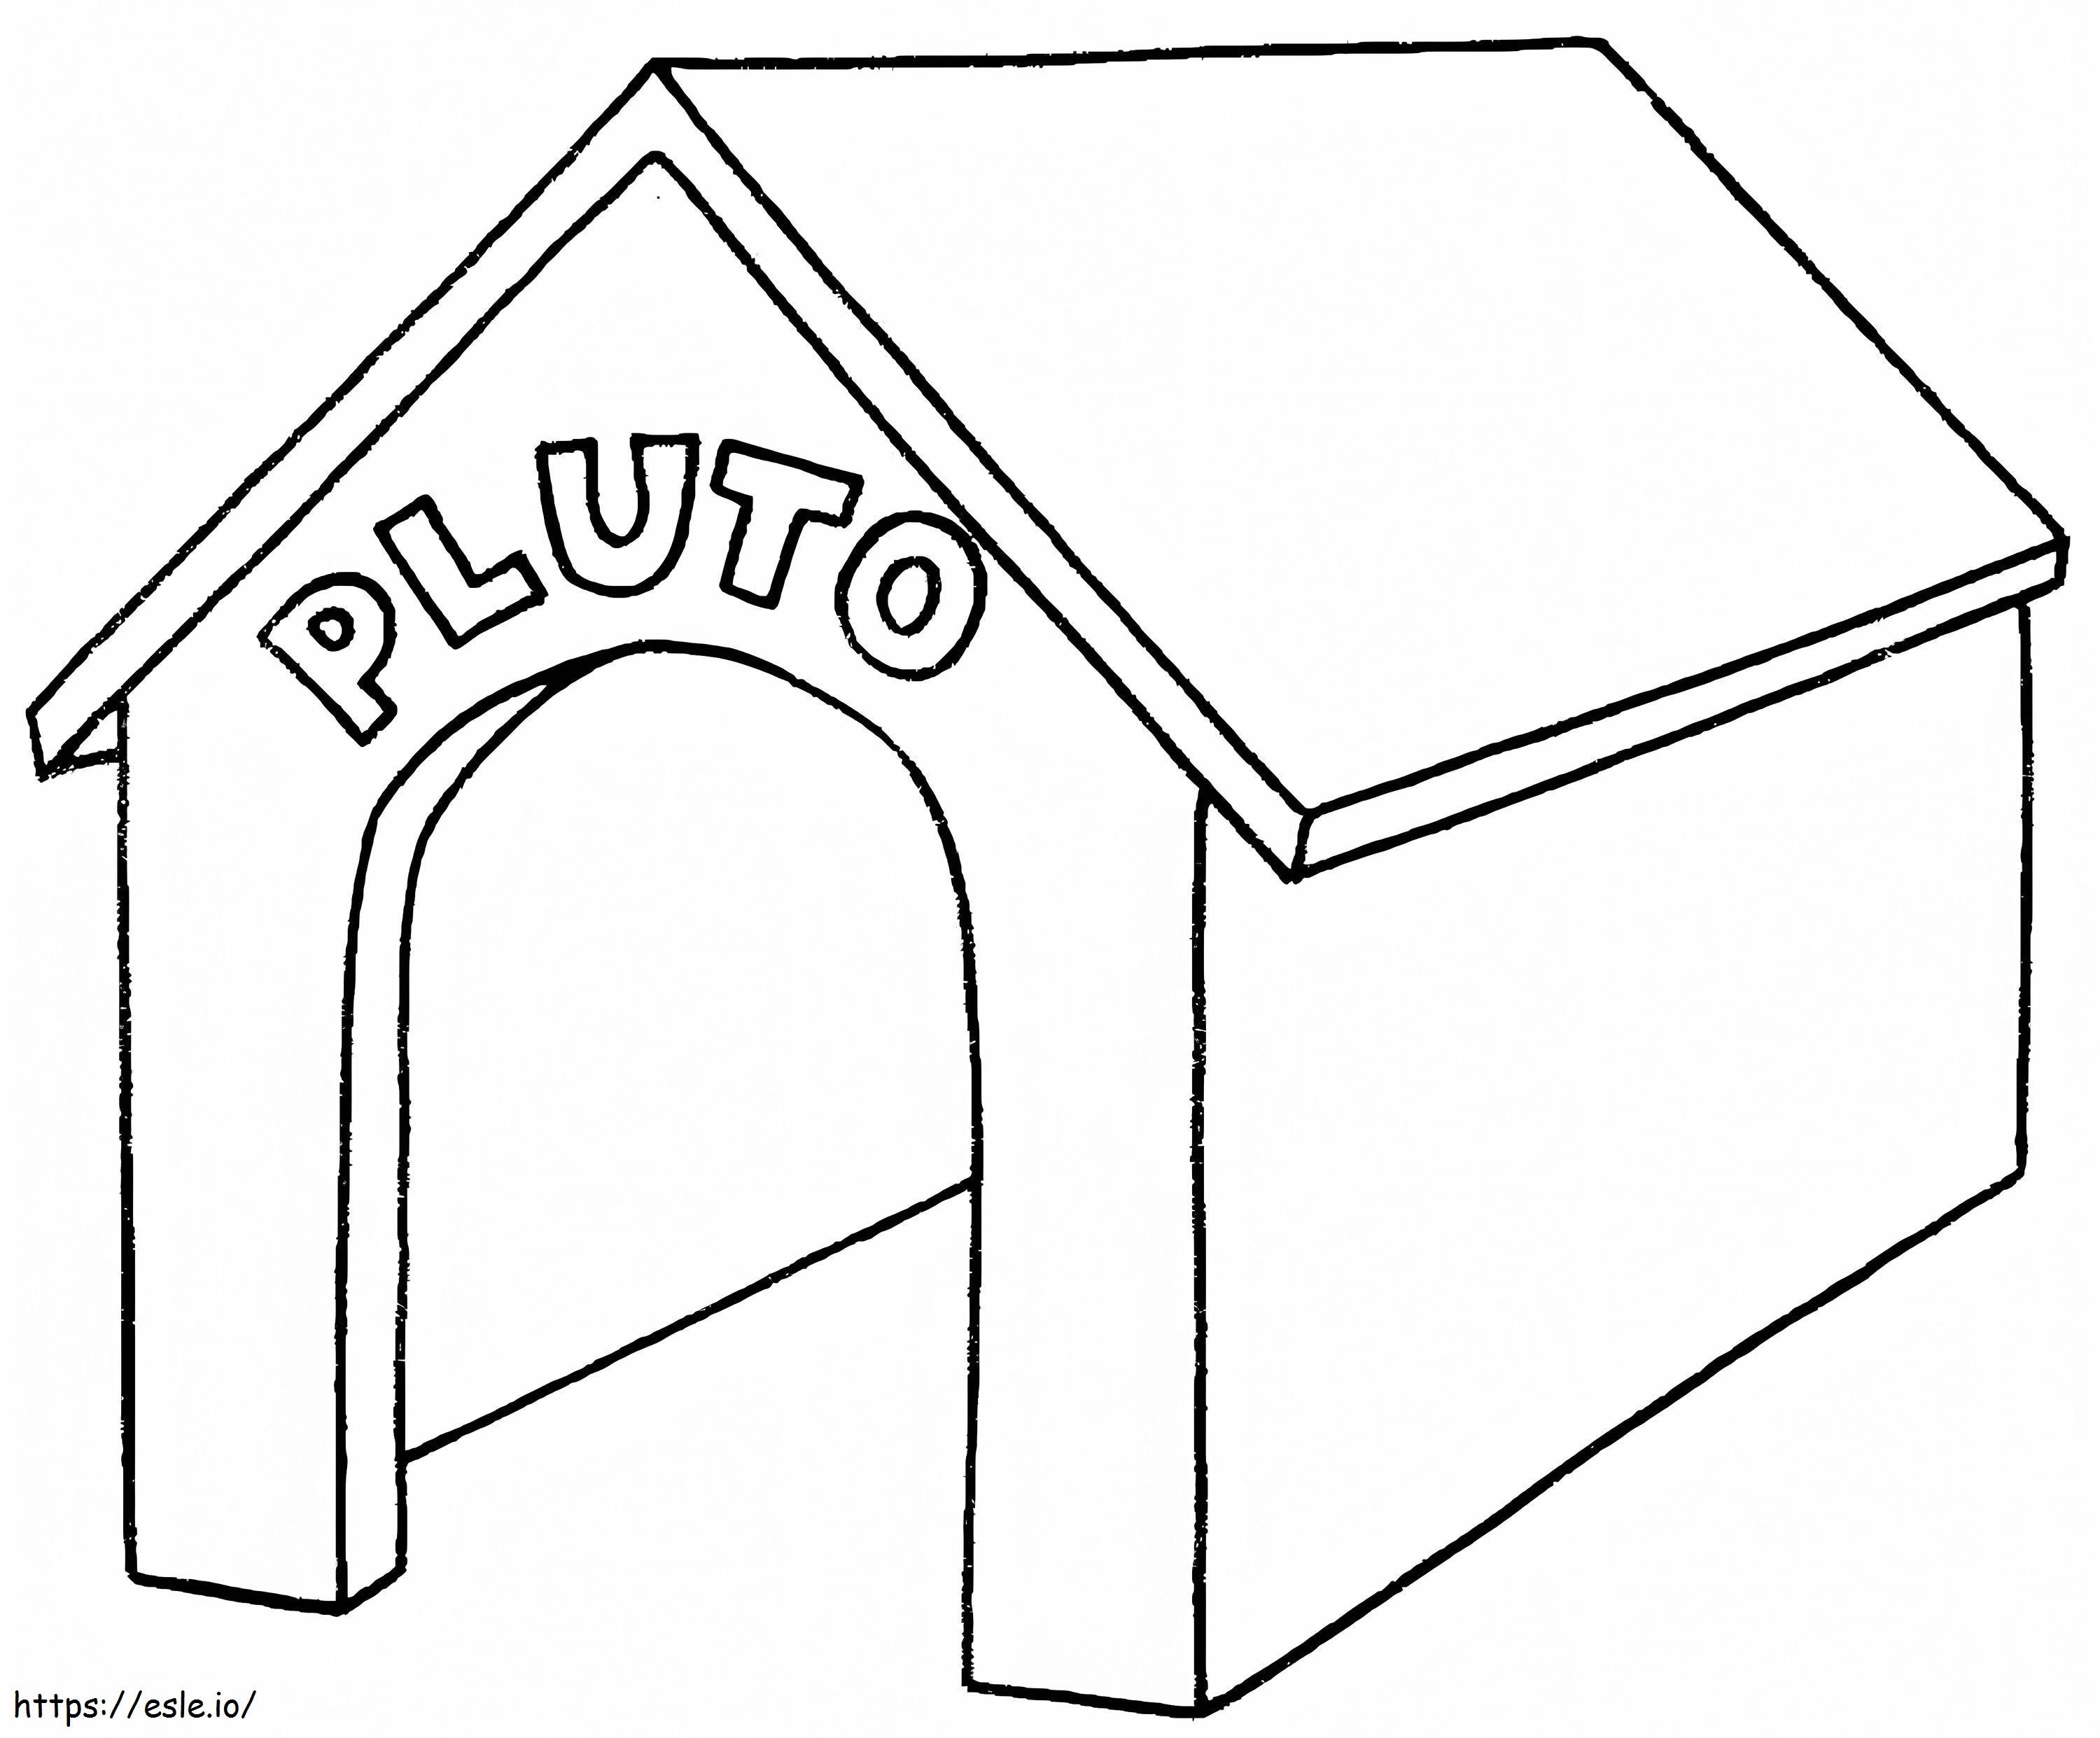 Pluto Dog House coloring page